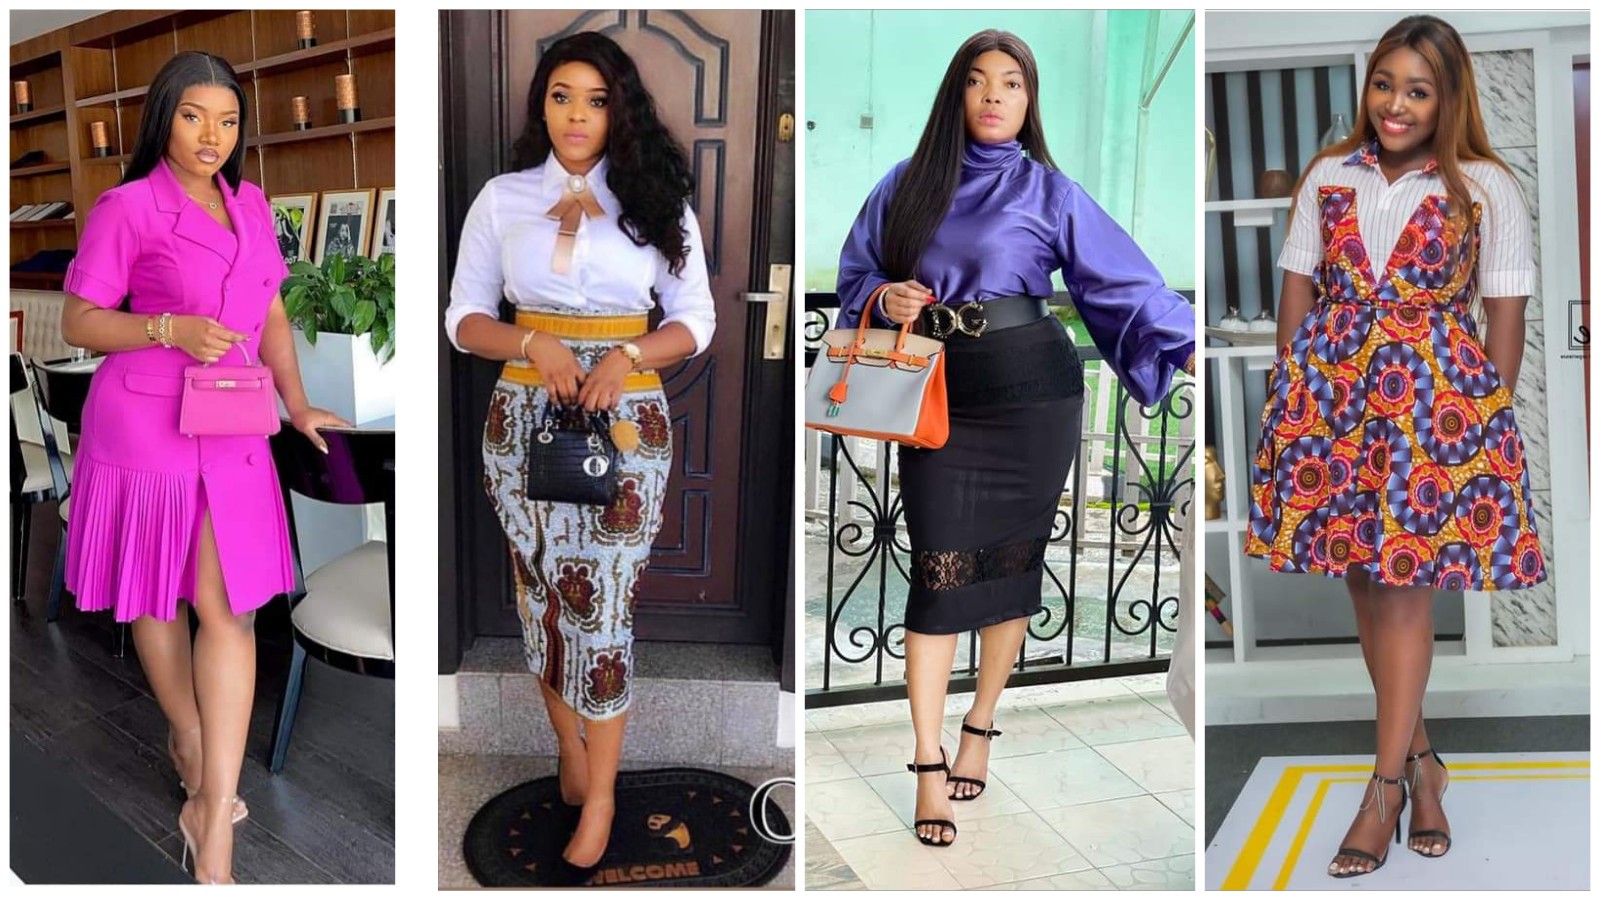 20 Photos Smart Styles Inspiration For Every Working Woman